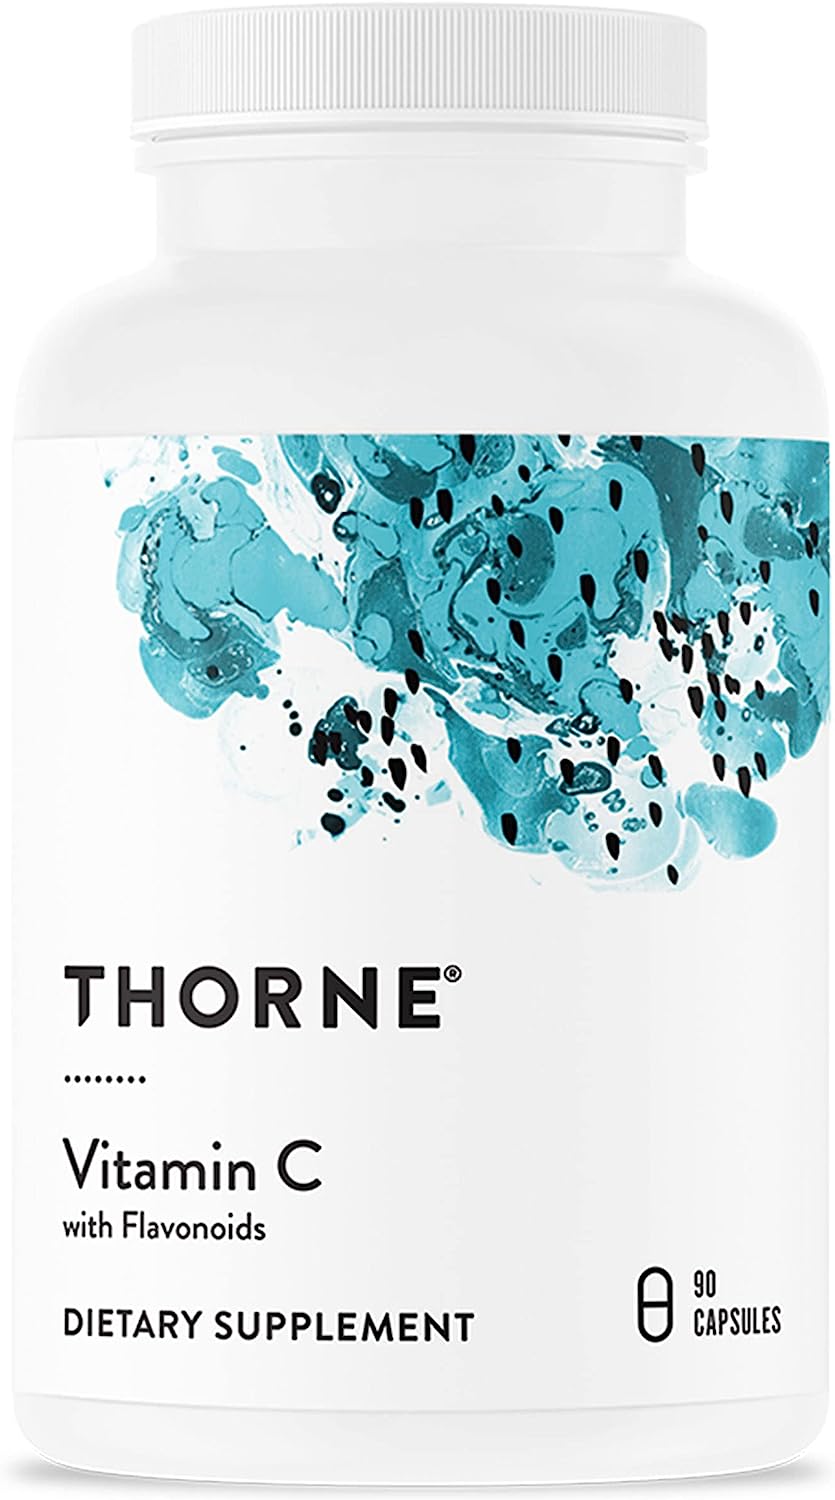 Thorne Vitamin C - Blend of Vitamin C and Citrus Bioavonoids from Oranges - Support Immune System, Production of Cellular Energy, Collagen Production and Healthy Tissue - Gluten-Free - 90 Capsules